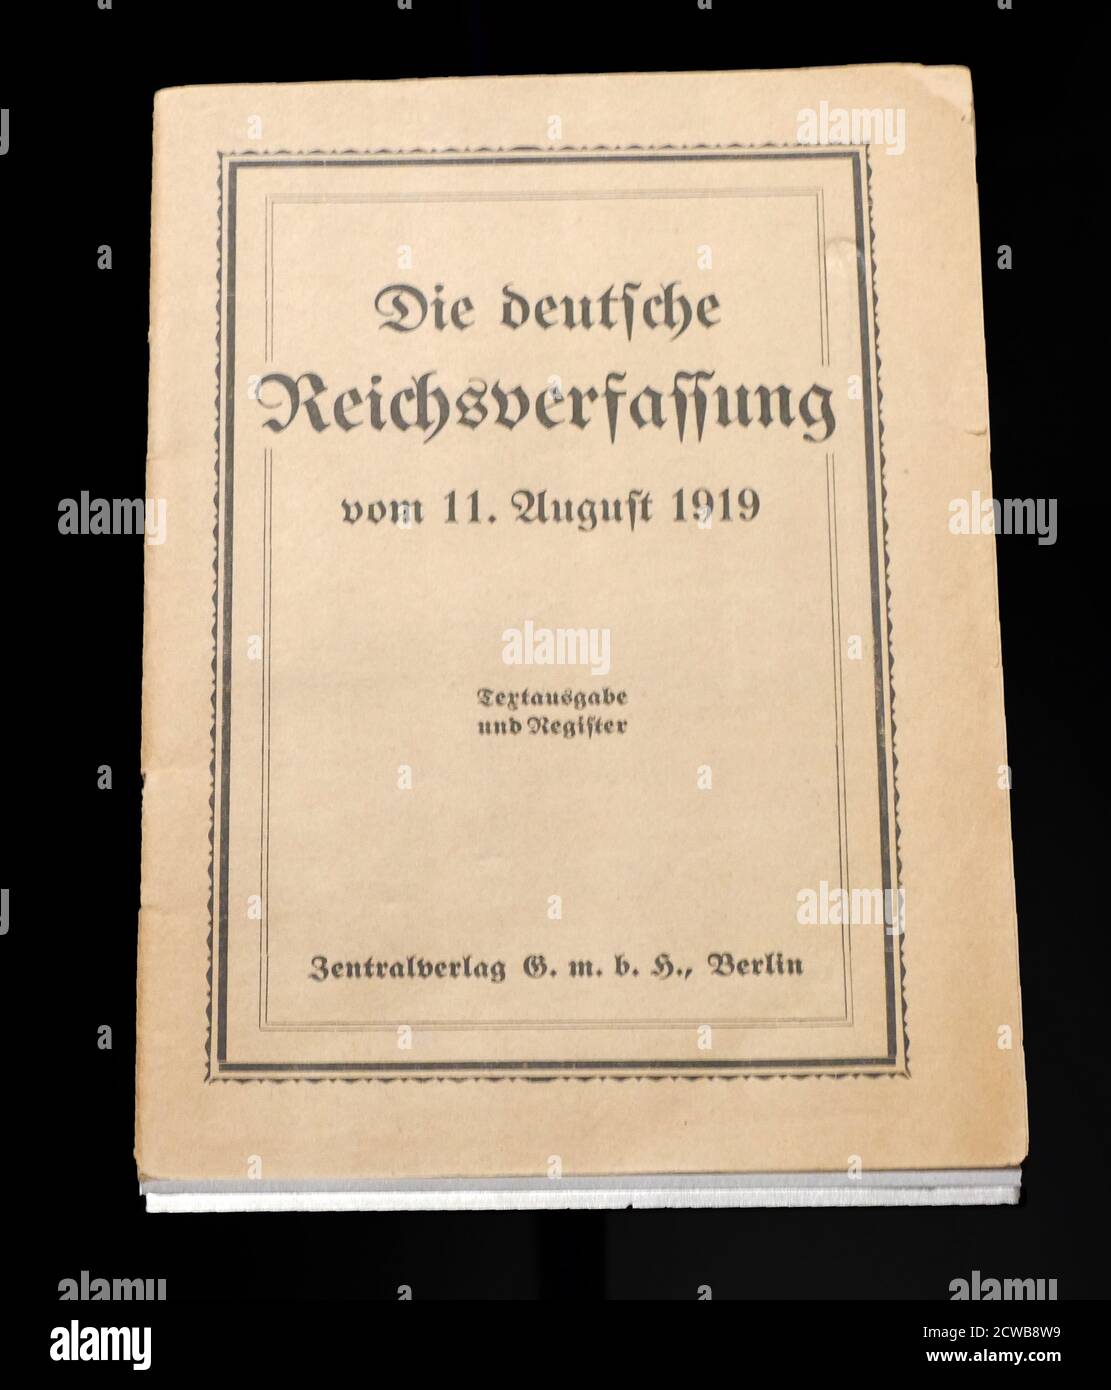 The Constitution of the German Reich was the constitution that governed Germany during the Weimar Republic era (1919-1933). The constitution declared Germany to be a democratic parliamentary republic with a legislature elected under proportional representation Stock Photo